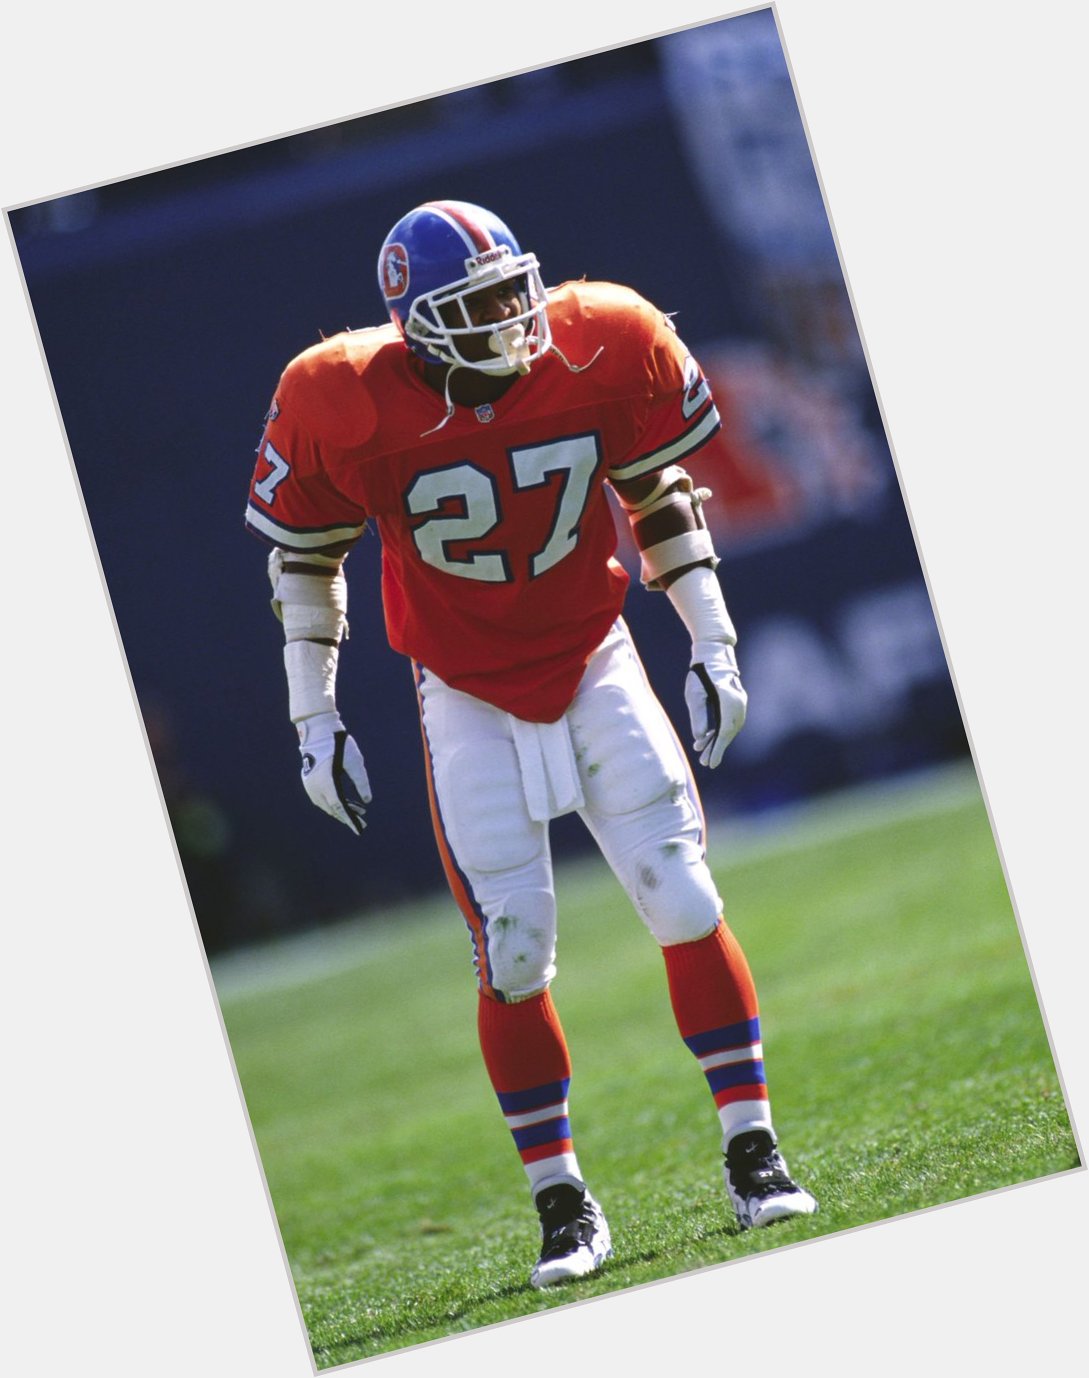 Happy Birthday to Steve Atwater who turns 51 today! 